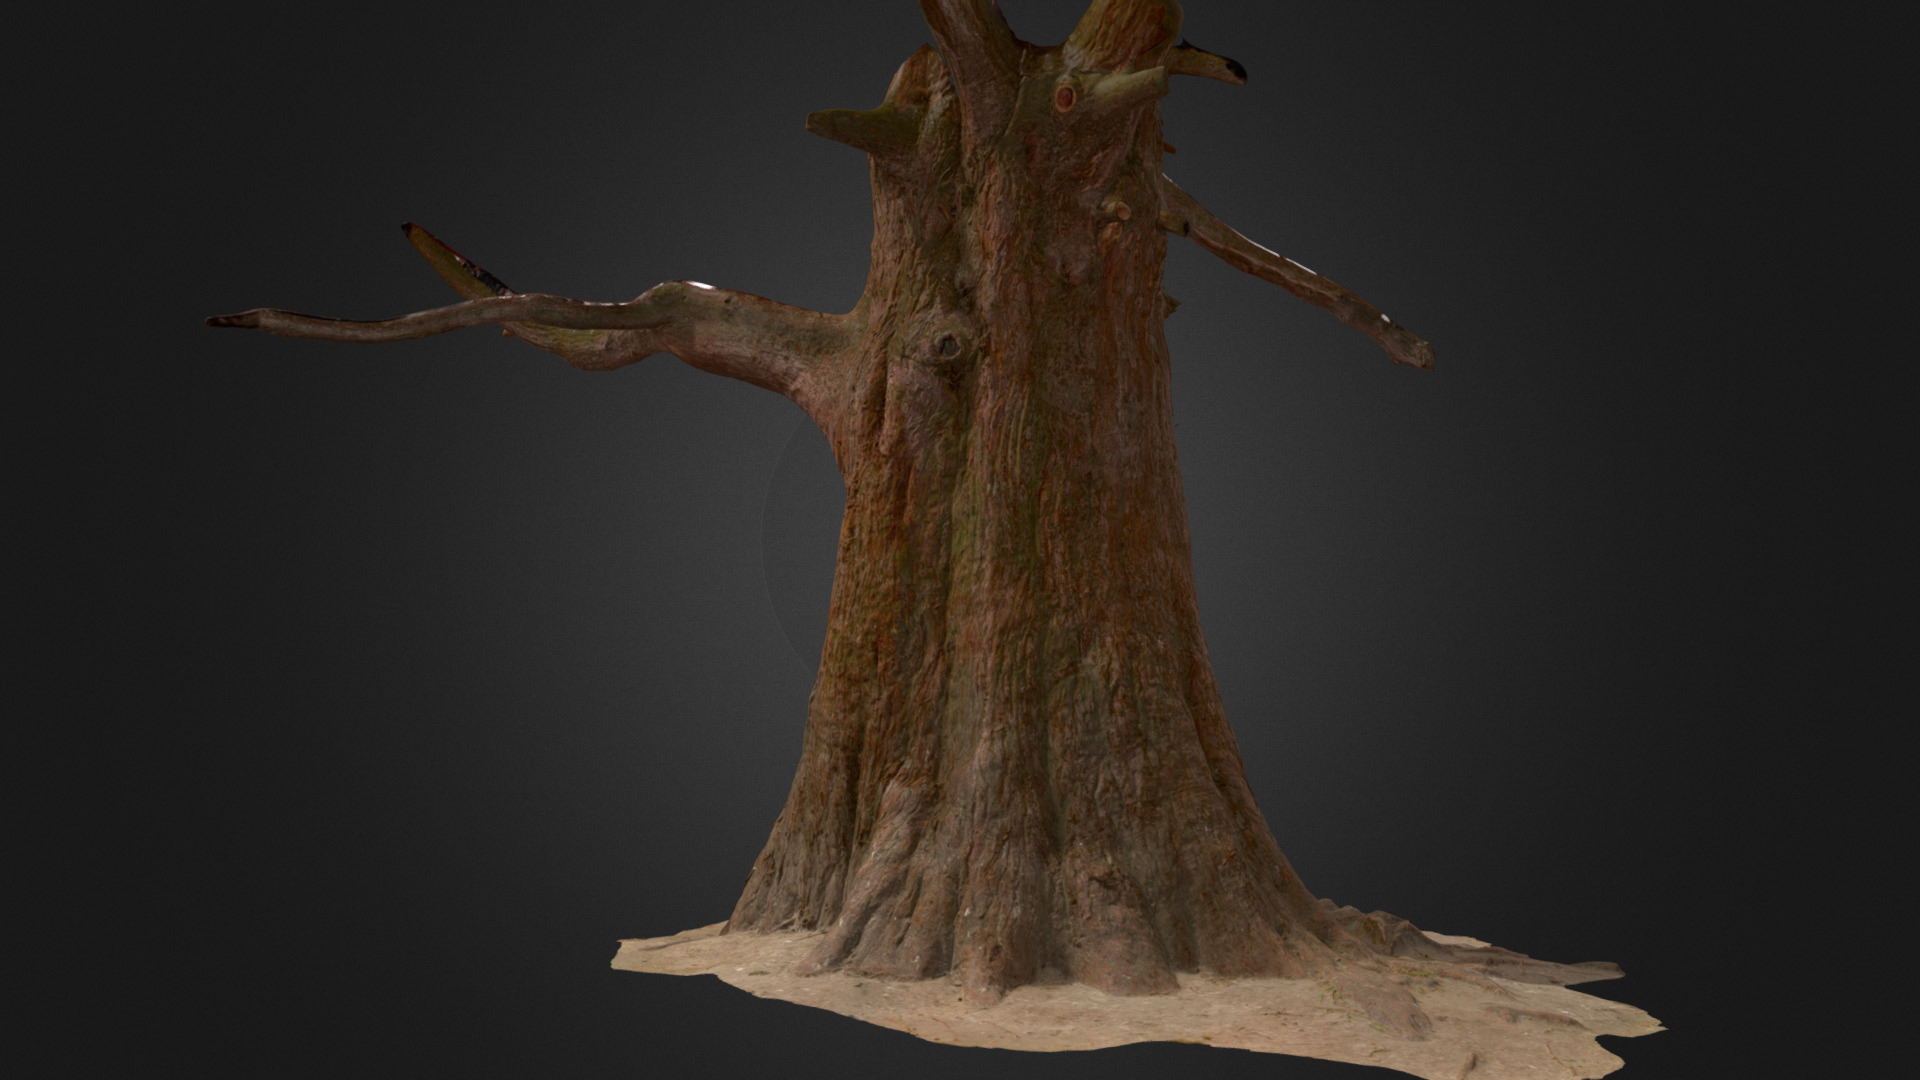 3D model Big Cedar tree trunk - This is a 3D model of the Big Cedar tree trunk. The 3D model is about a tree trunk with a carved face.